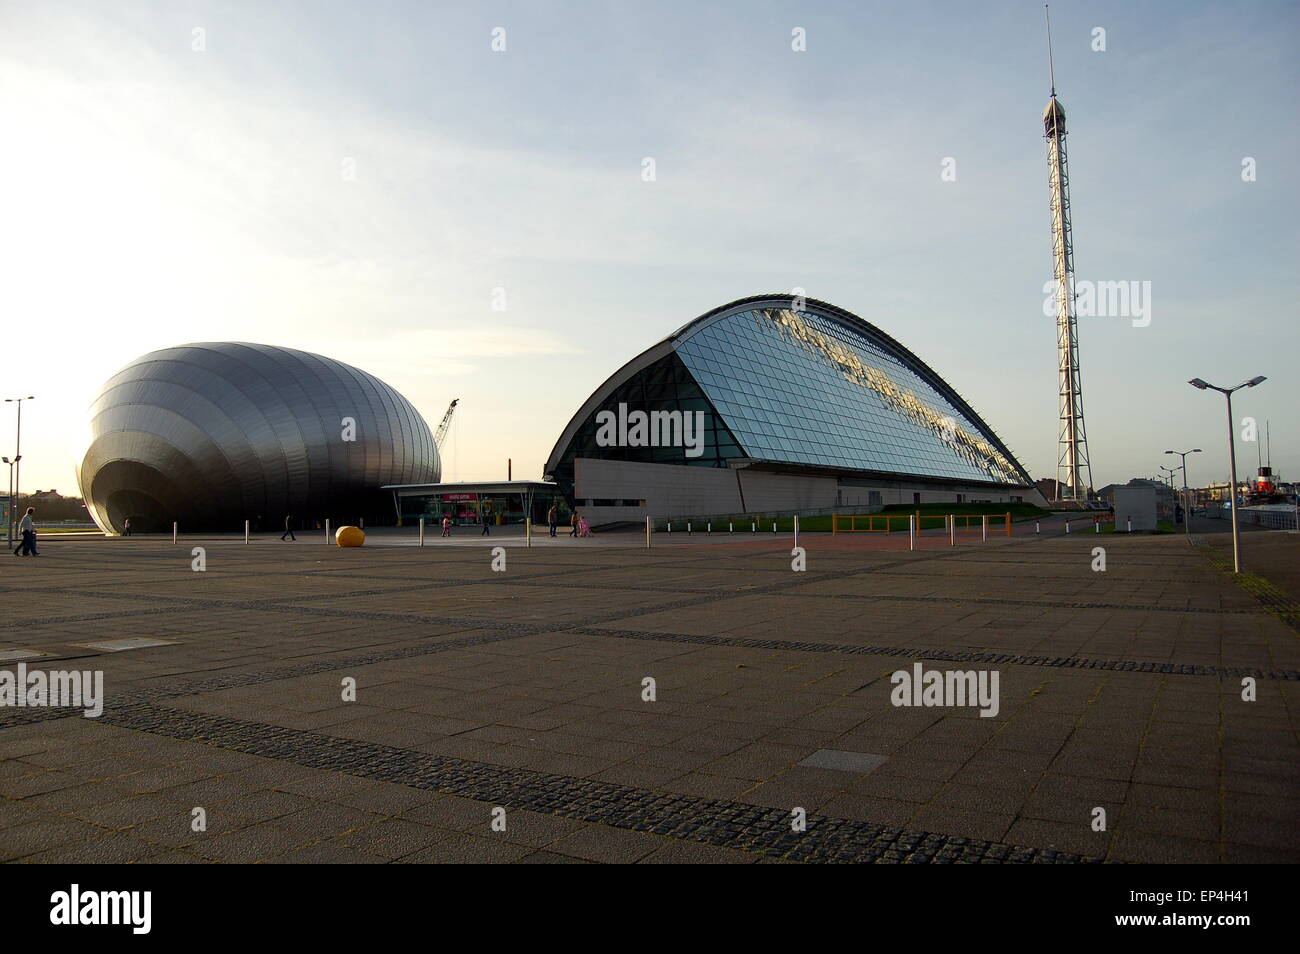 A view of the Clyde Auditorium in Glasgow. Stock Photo